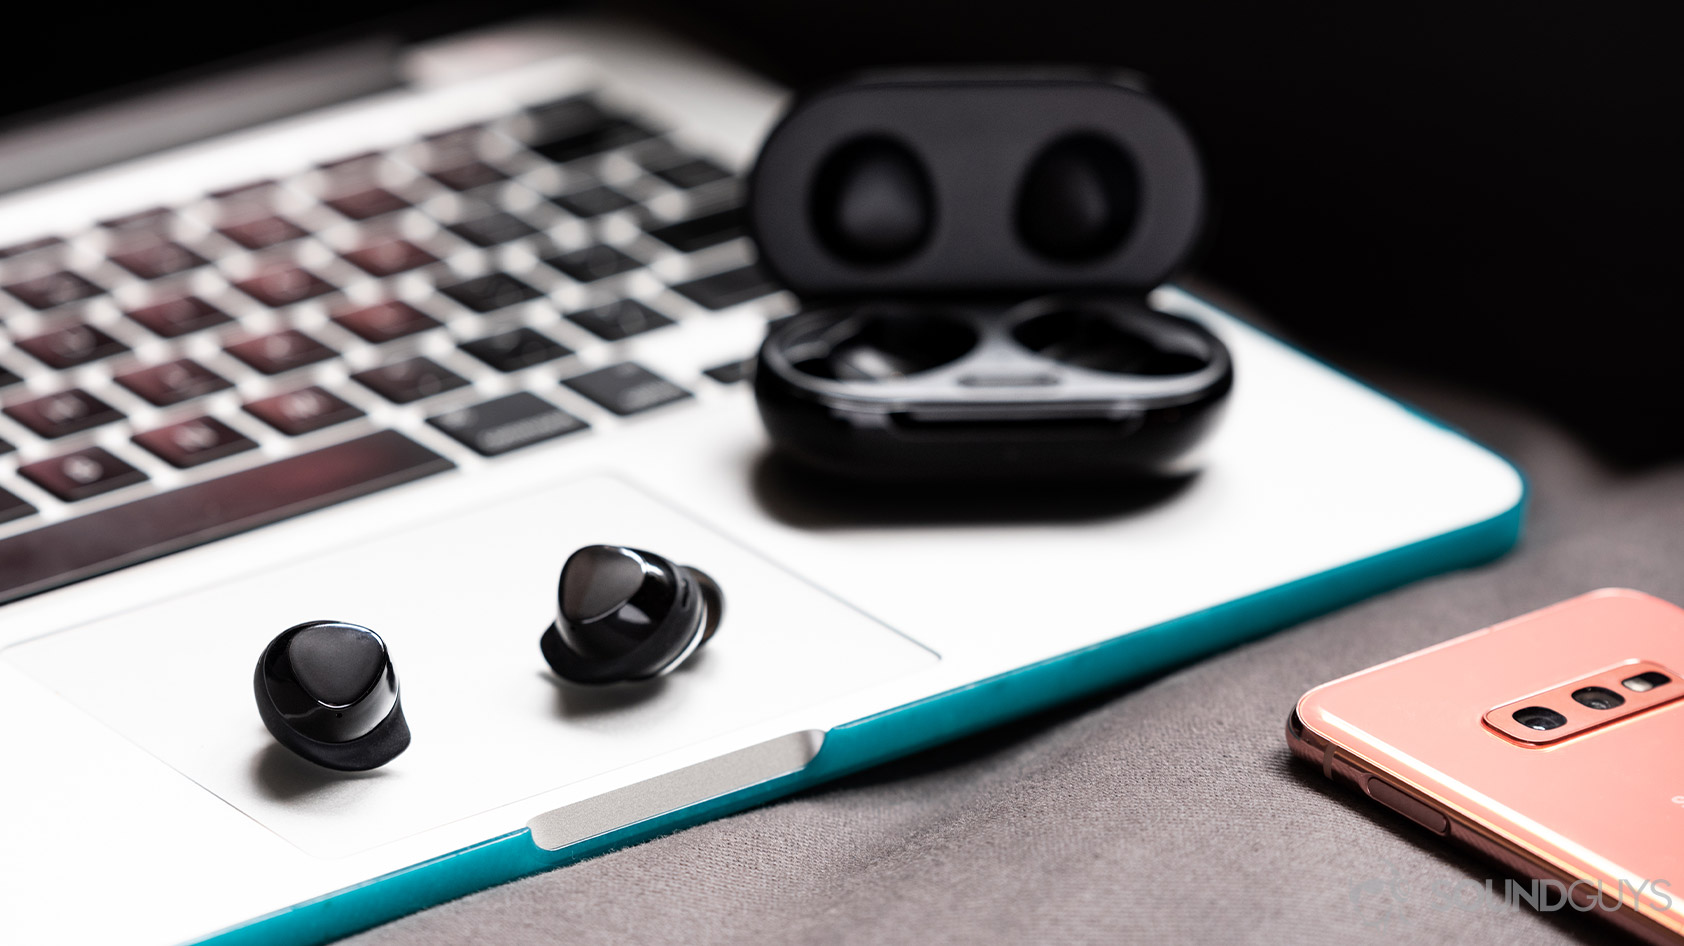 A picture of the Samsung Galaxy Buds Plus true wireless earbuds outside of the open charging case atop a Macbook Pro.